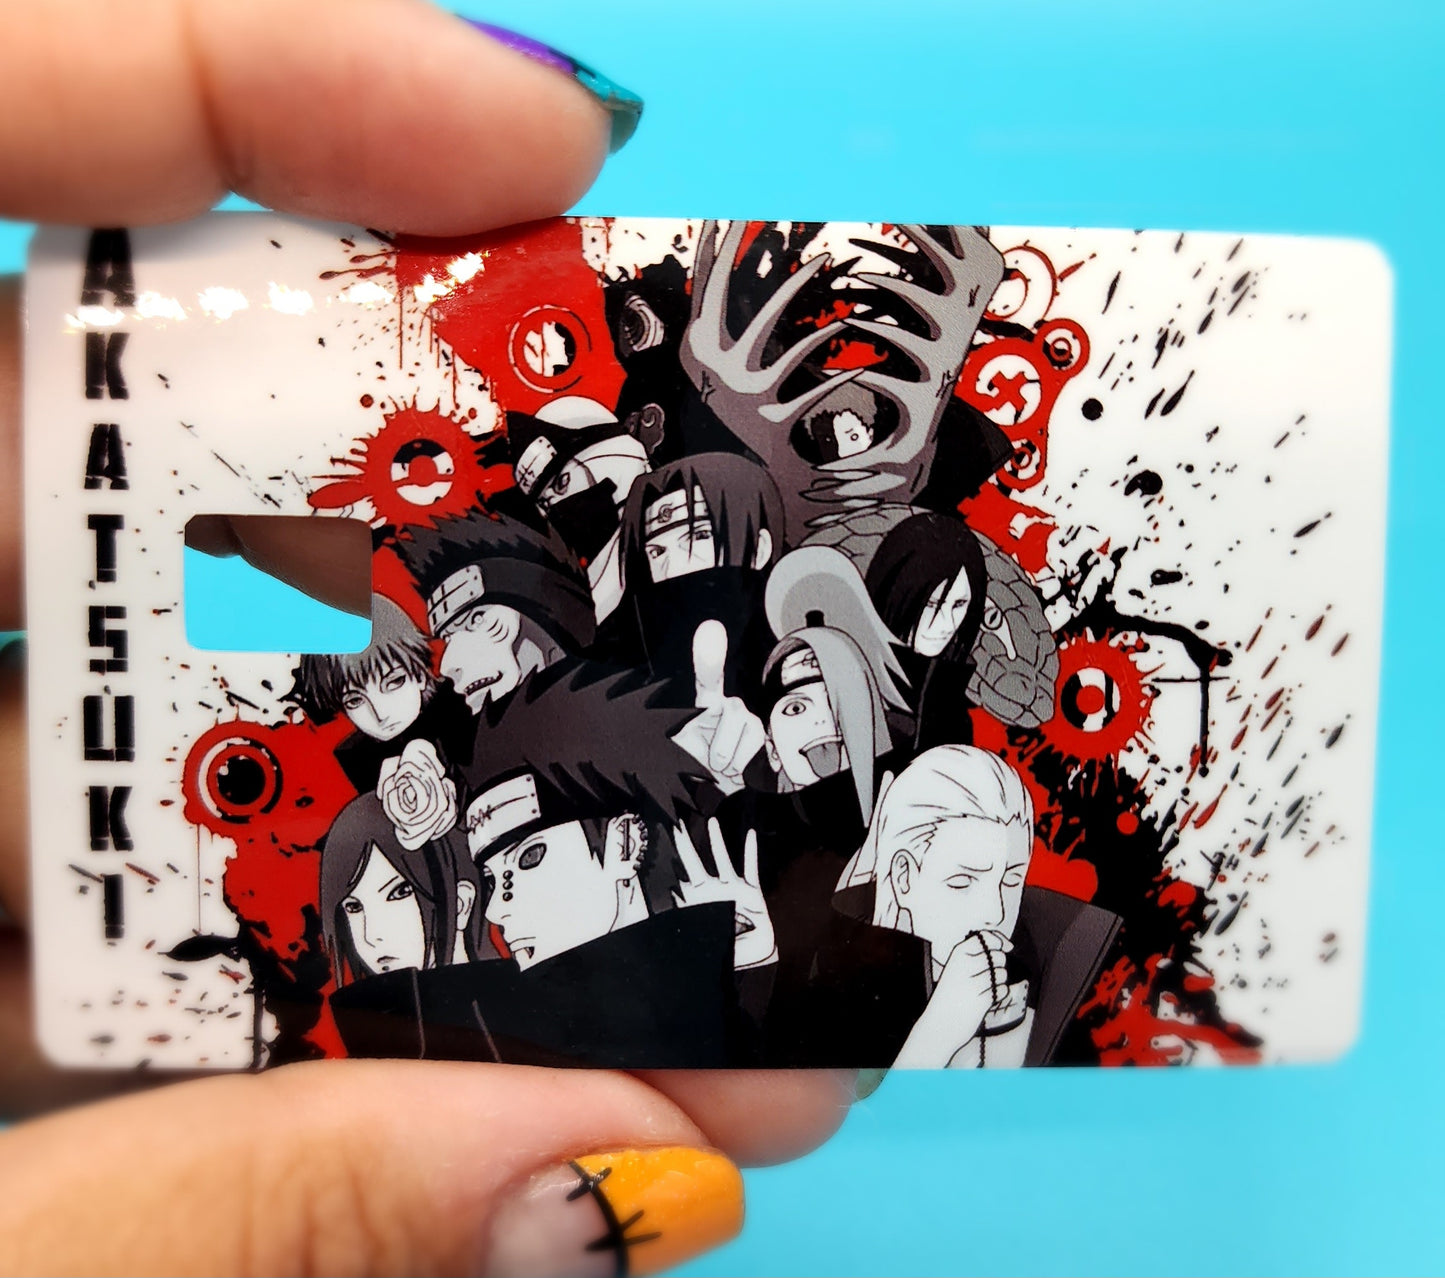 Anime (Naruto) inspired Credit card skin/covers